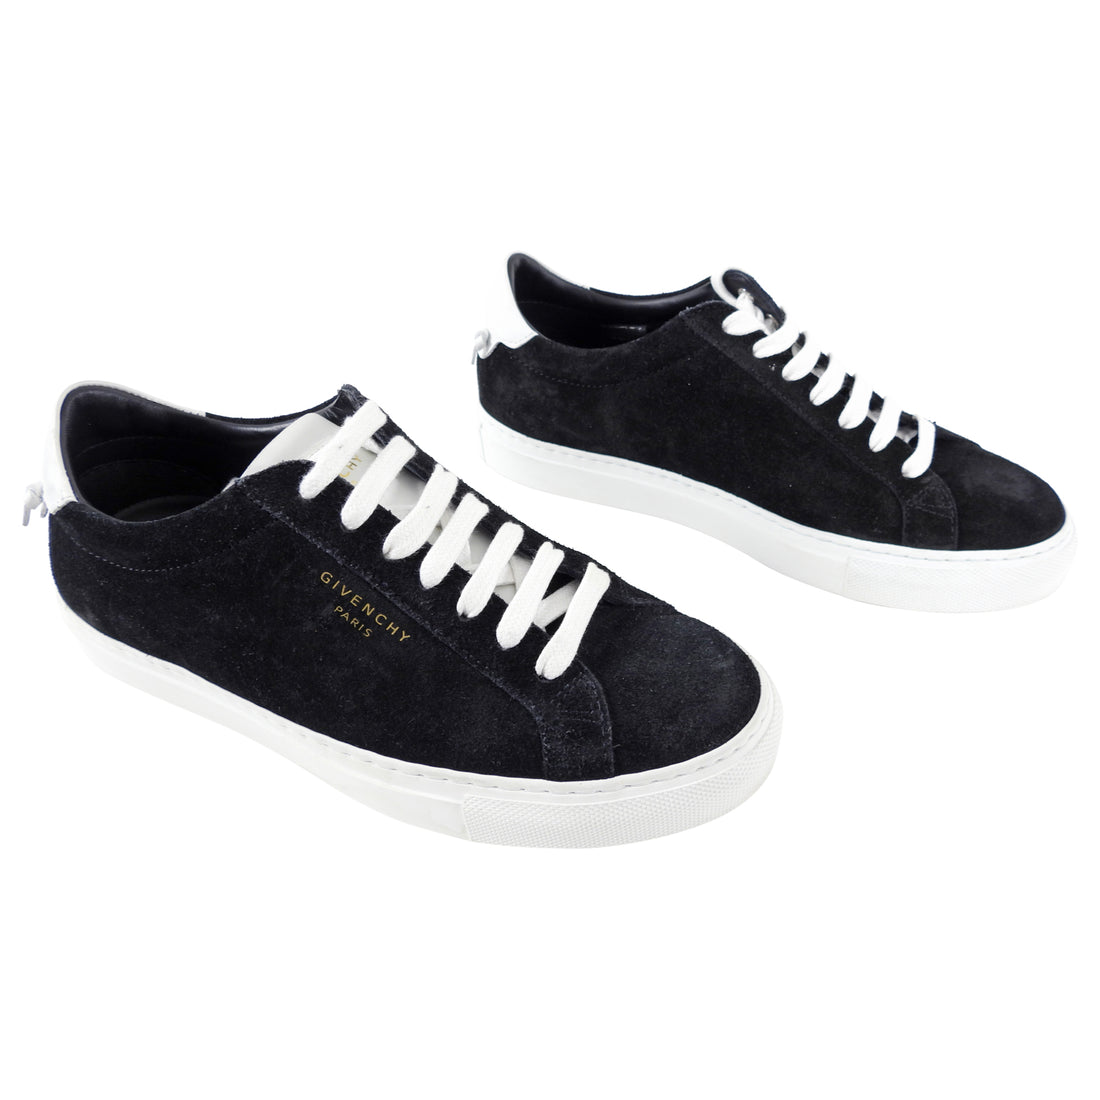 Givenchy Black Suede Urban Street Sneakers - 36